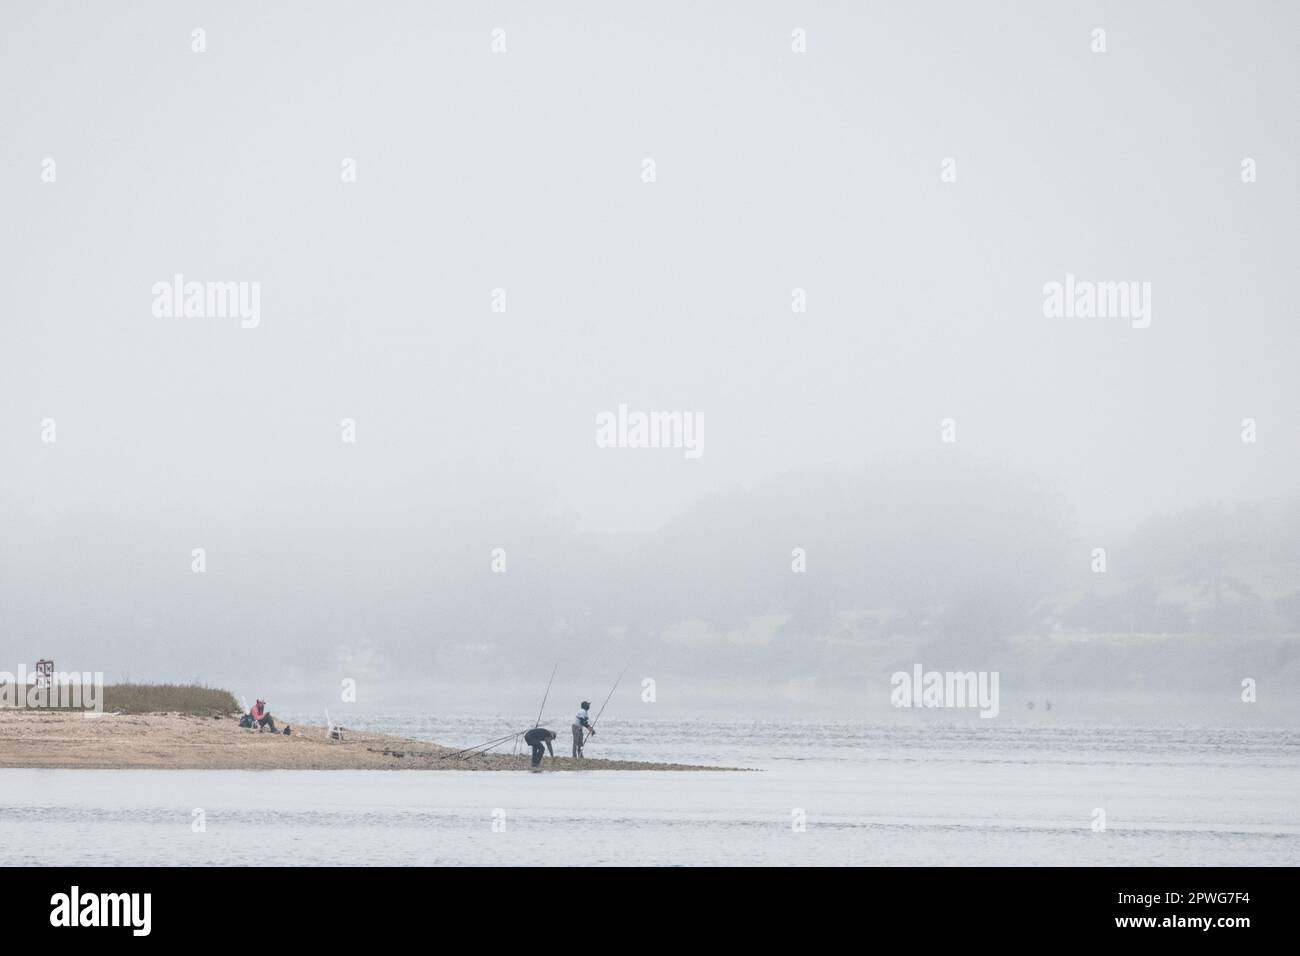 A minimalist landscape image of fishermen on a beach in California on a foggy day with lots of negative space overhead. Stock Photo